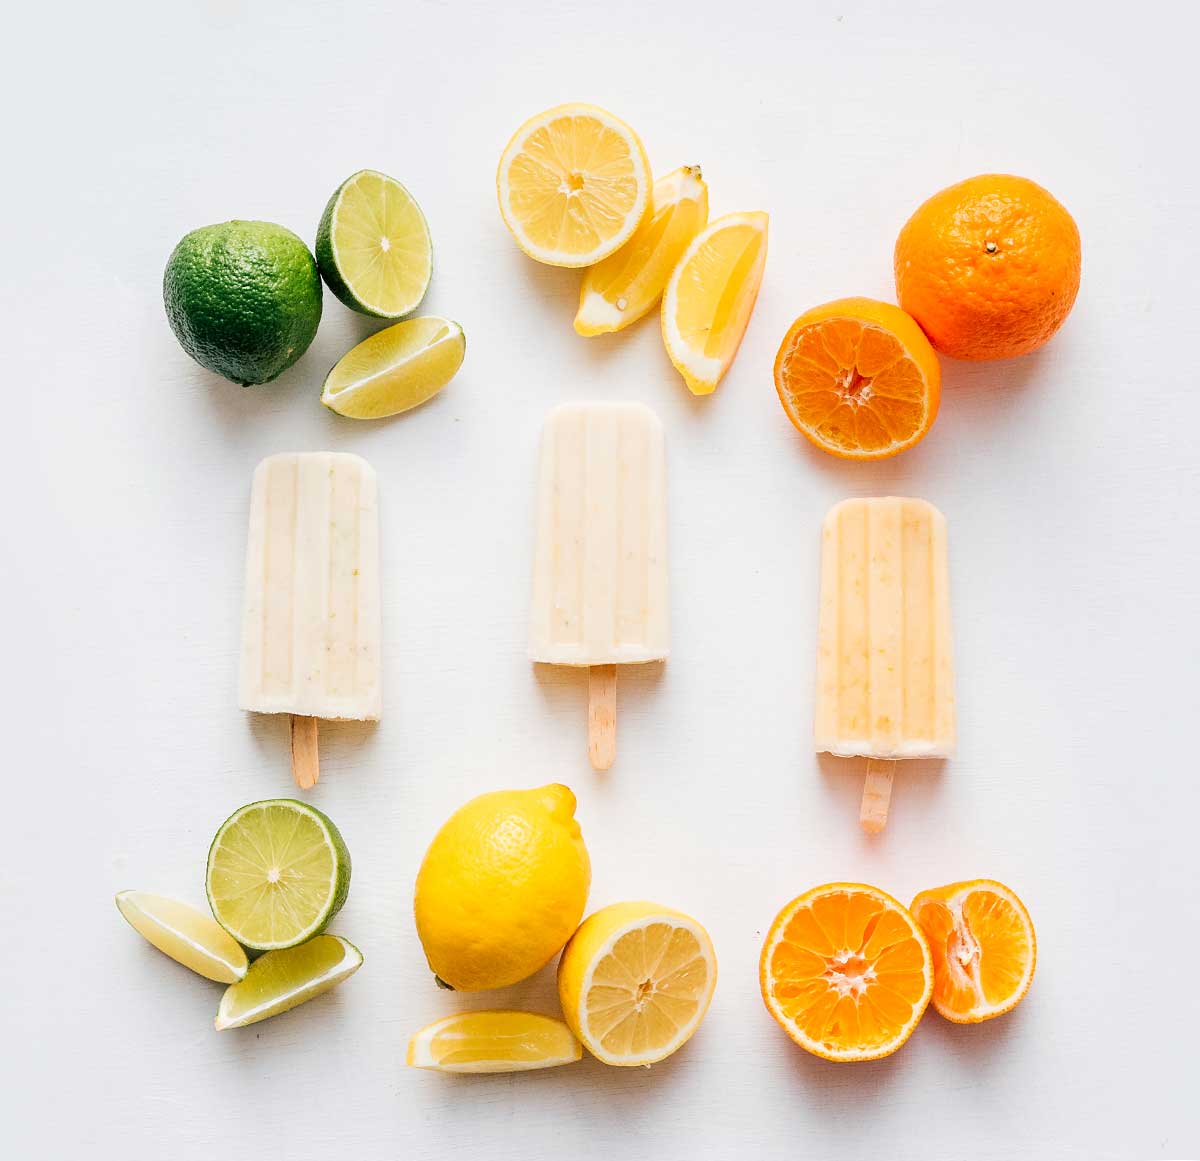 Lime, lemon, and orange creamsicle popsicles on a white background with citrus fruit